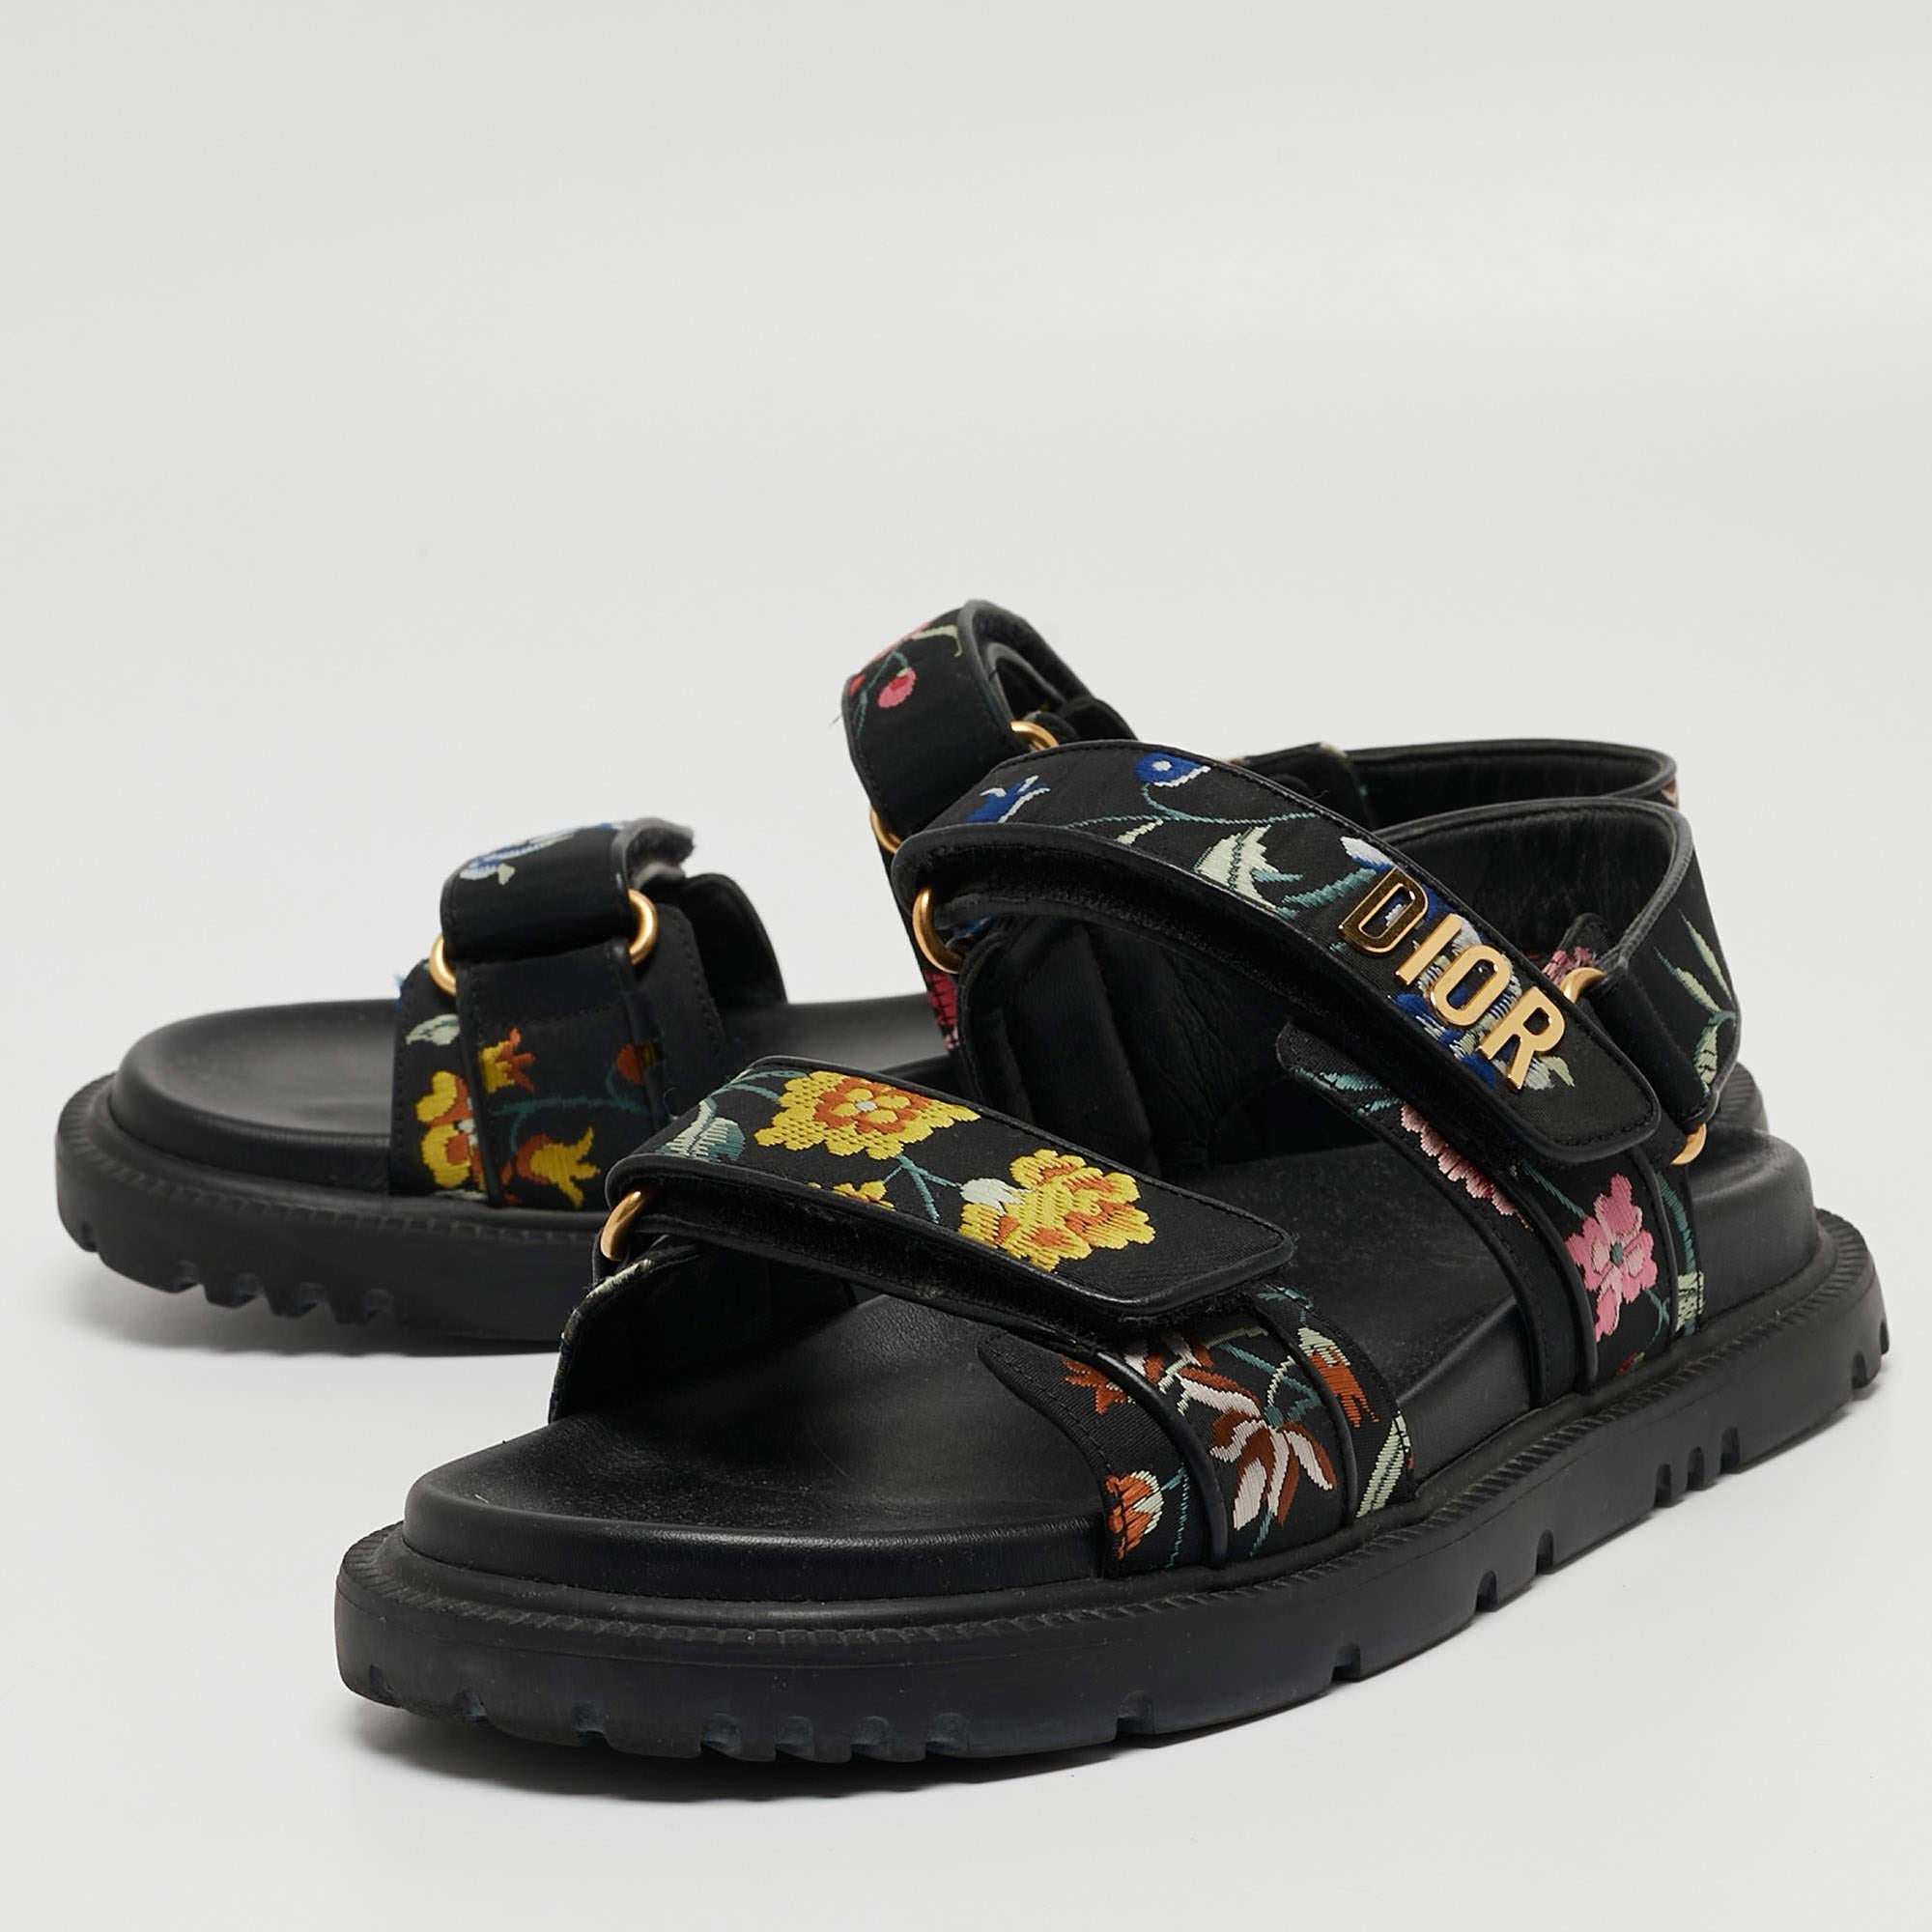 Comfortable steps are easily achieved with the leather soles of these Dior sandals. Crafted from floral-printed, they are decorated with brand detailing on the uppers and are complete with velcro straps.

Includes: Original Dustbag, Info Card,